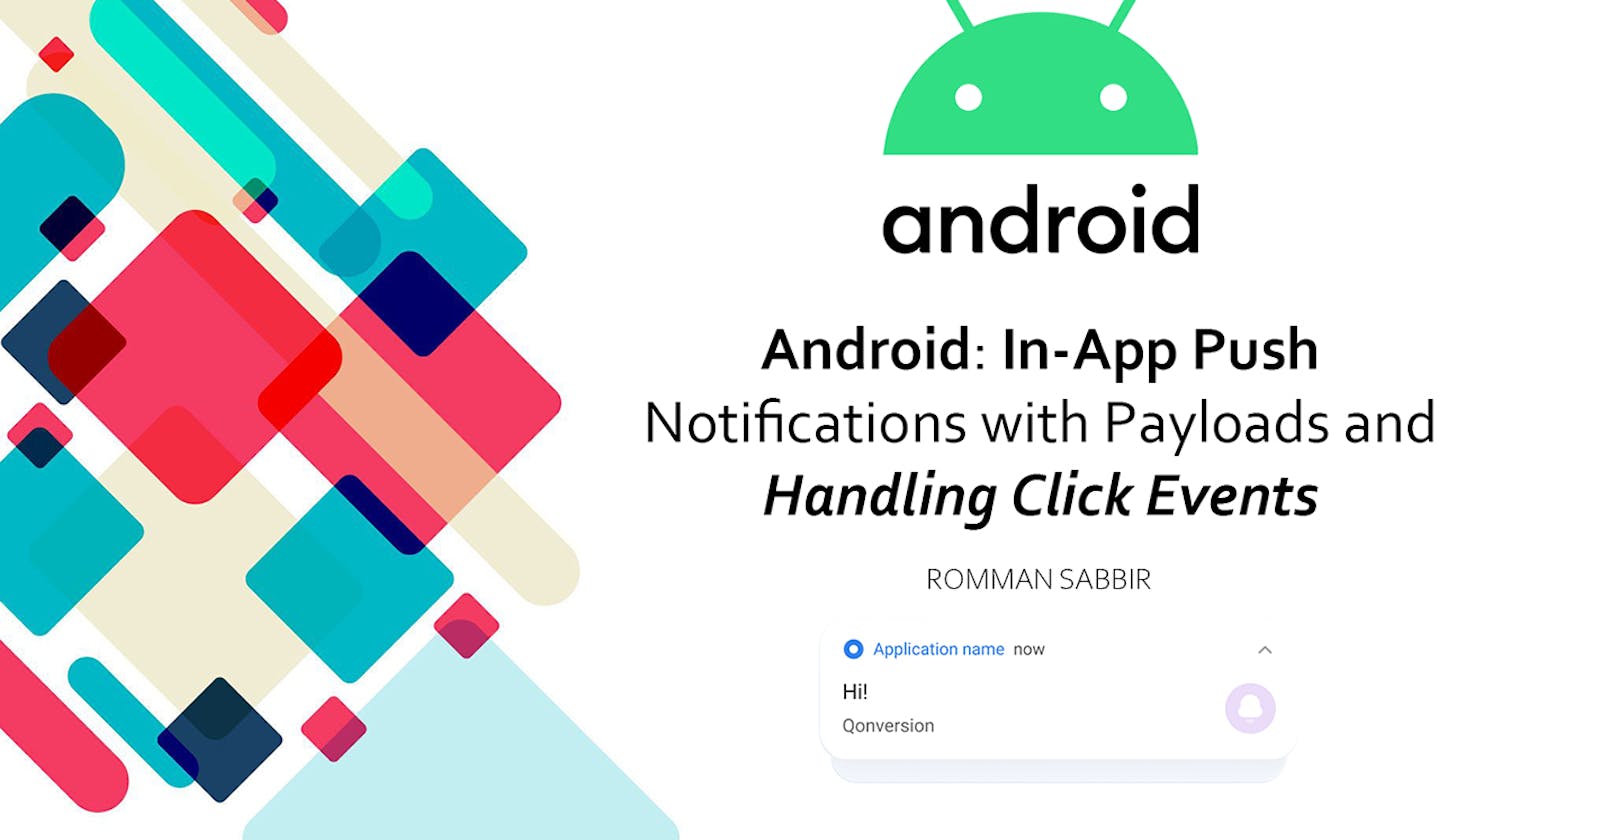 Android: In-App Push Notifications with Payloads and Handling Click Events